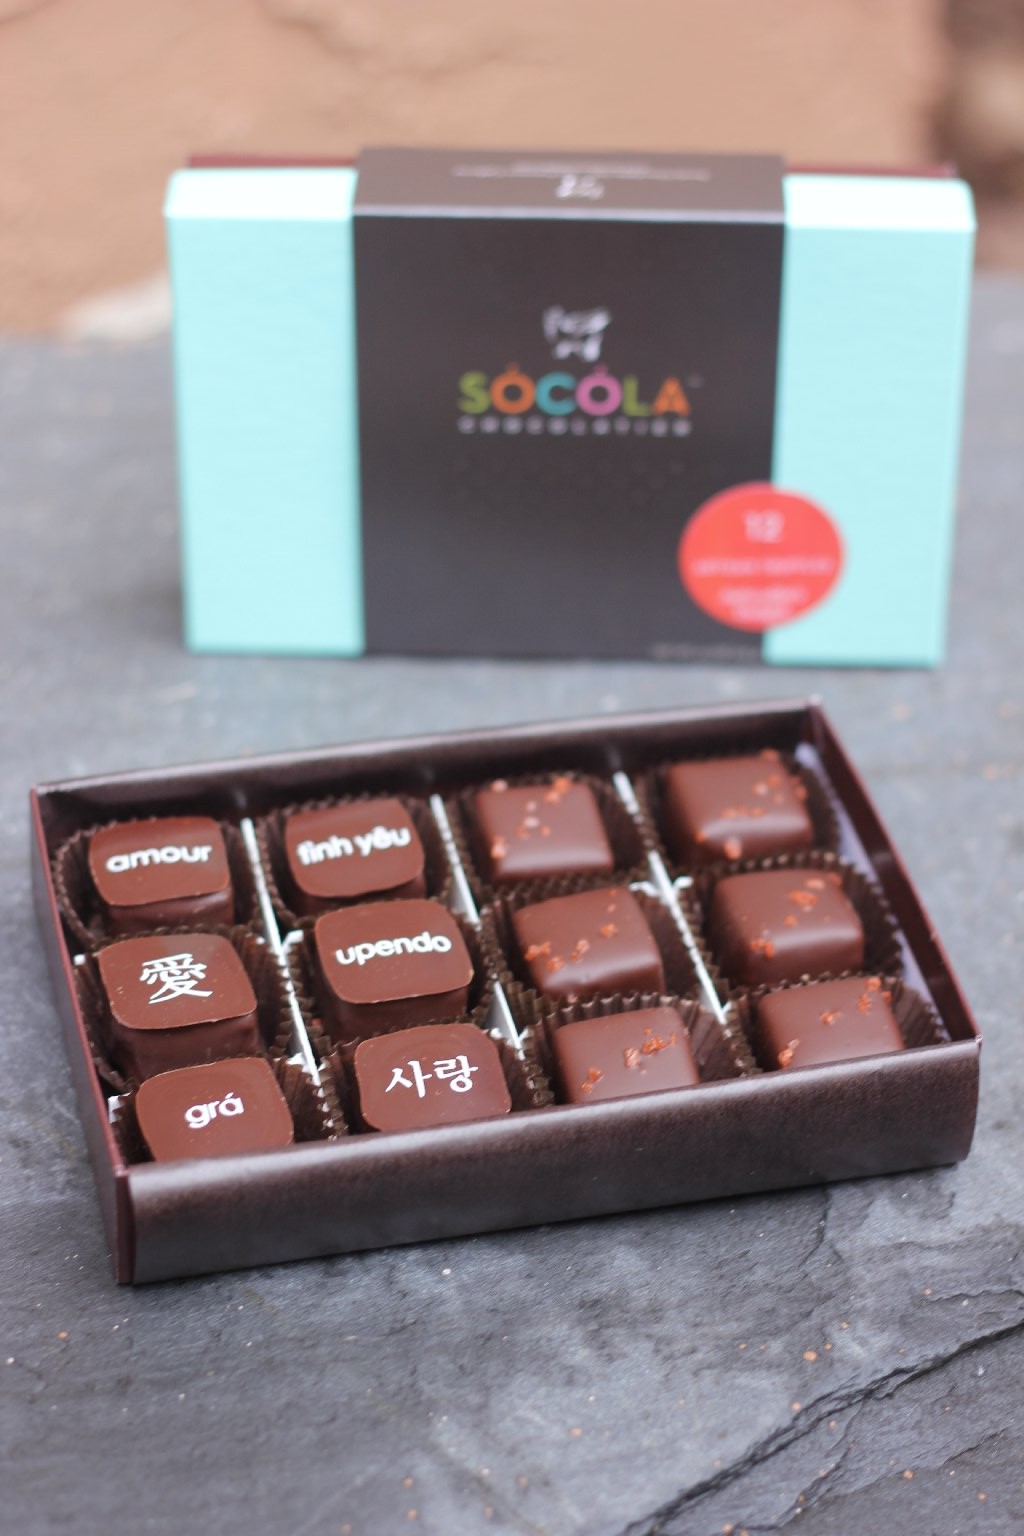 Socola Chocolatier offers a Valentine’s Day selection that includes chocolates with “love” in various languages. Photo: Momo Chang